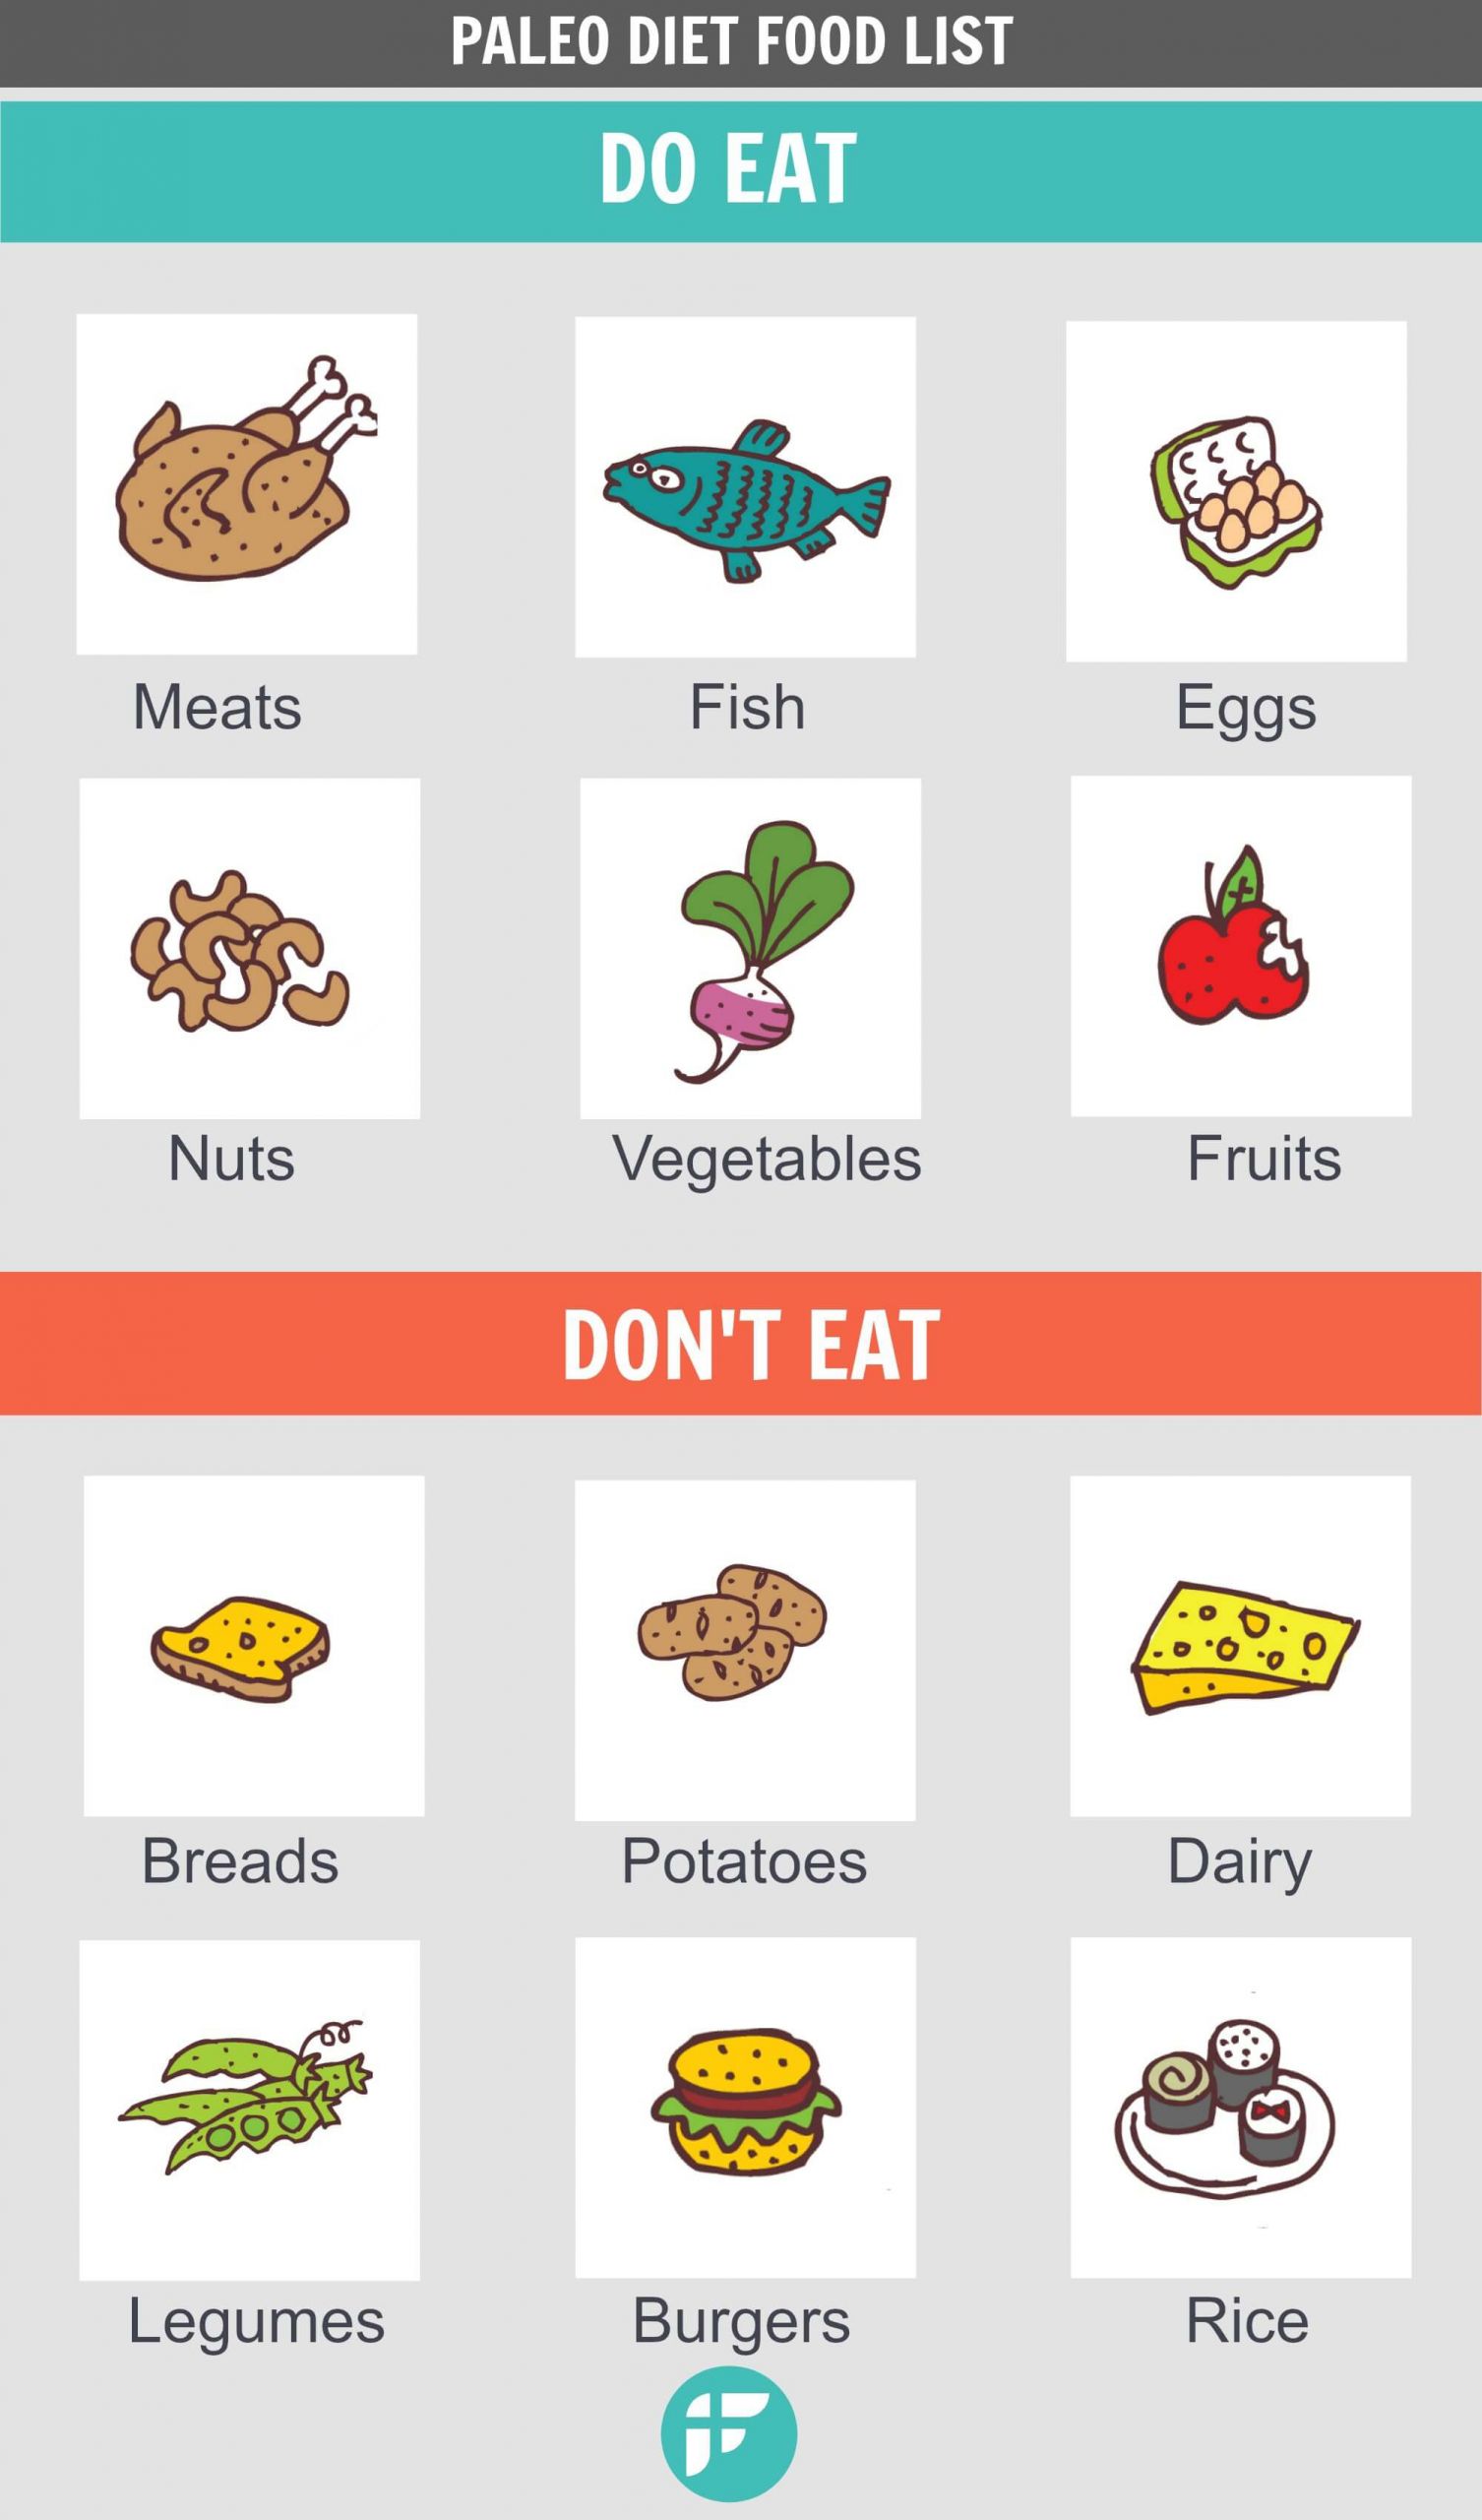 Foods To Eat On Paleo Diet
 Paleo Diet Food List What to Eat and Not to Eat